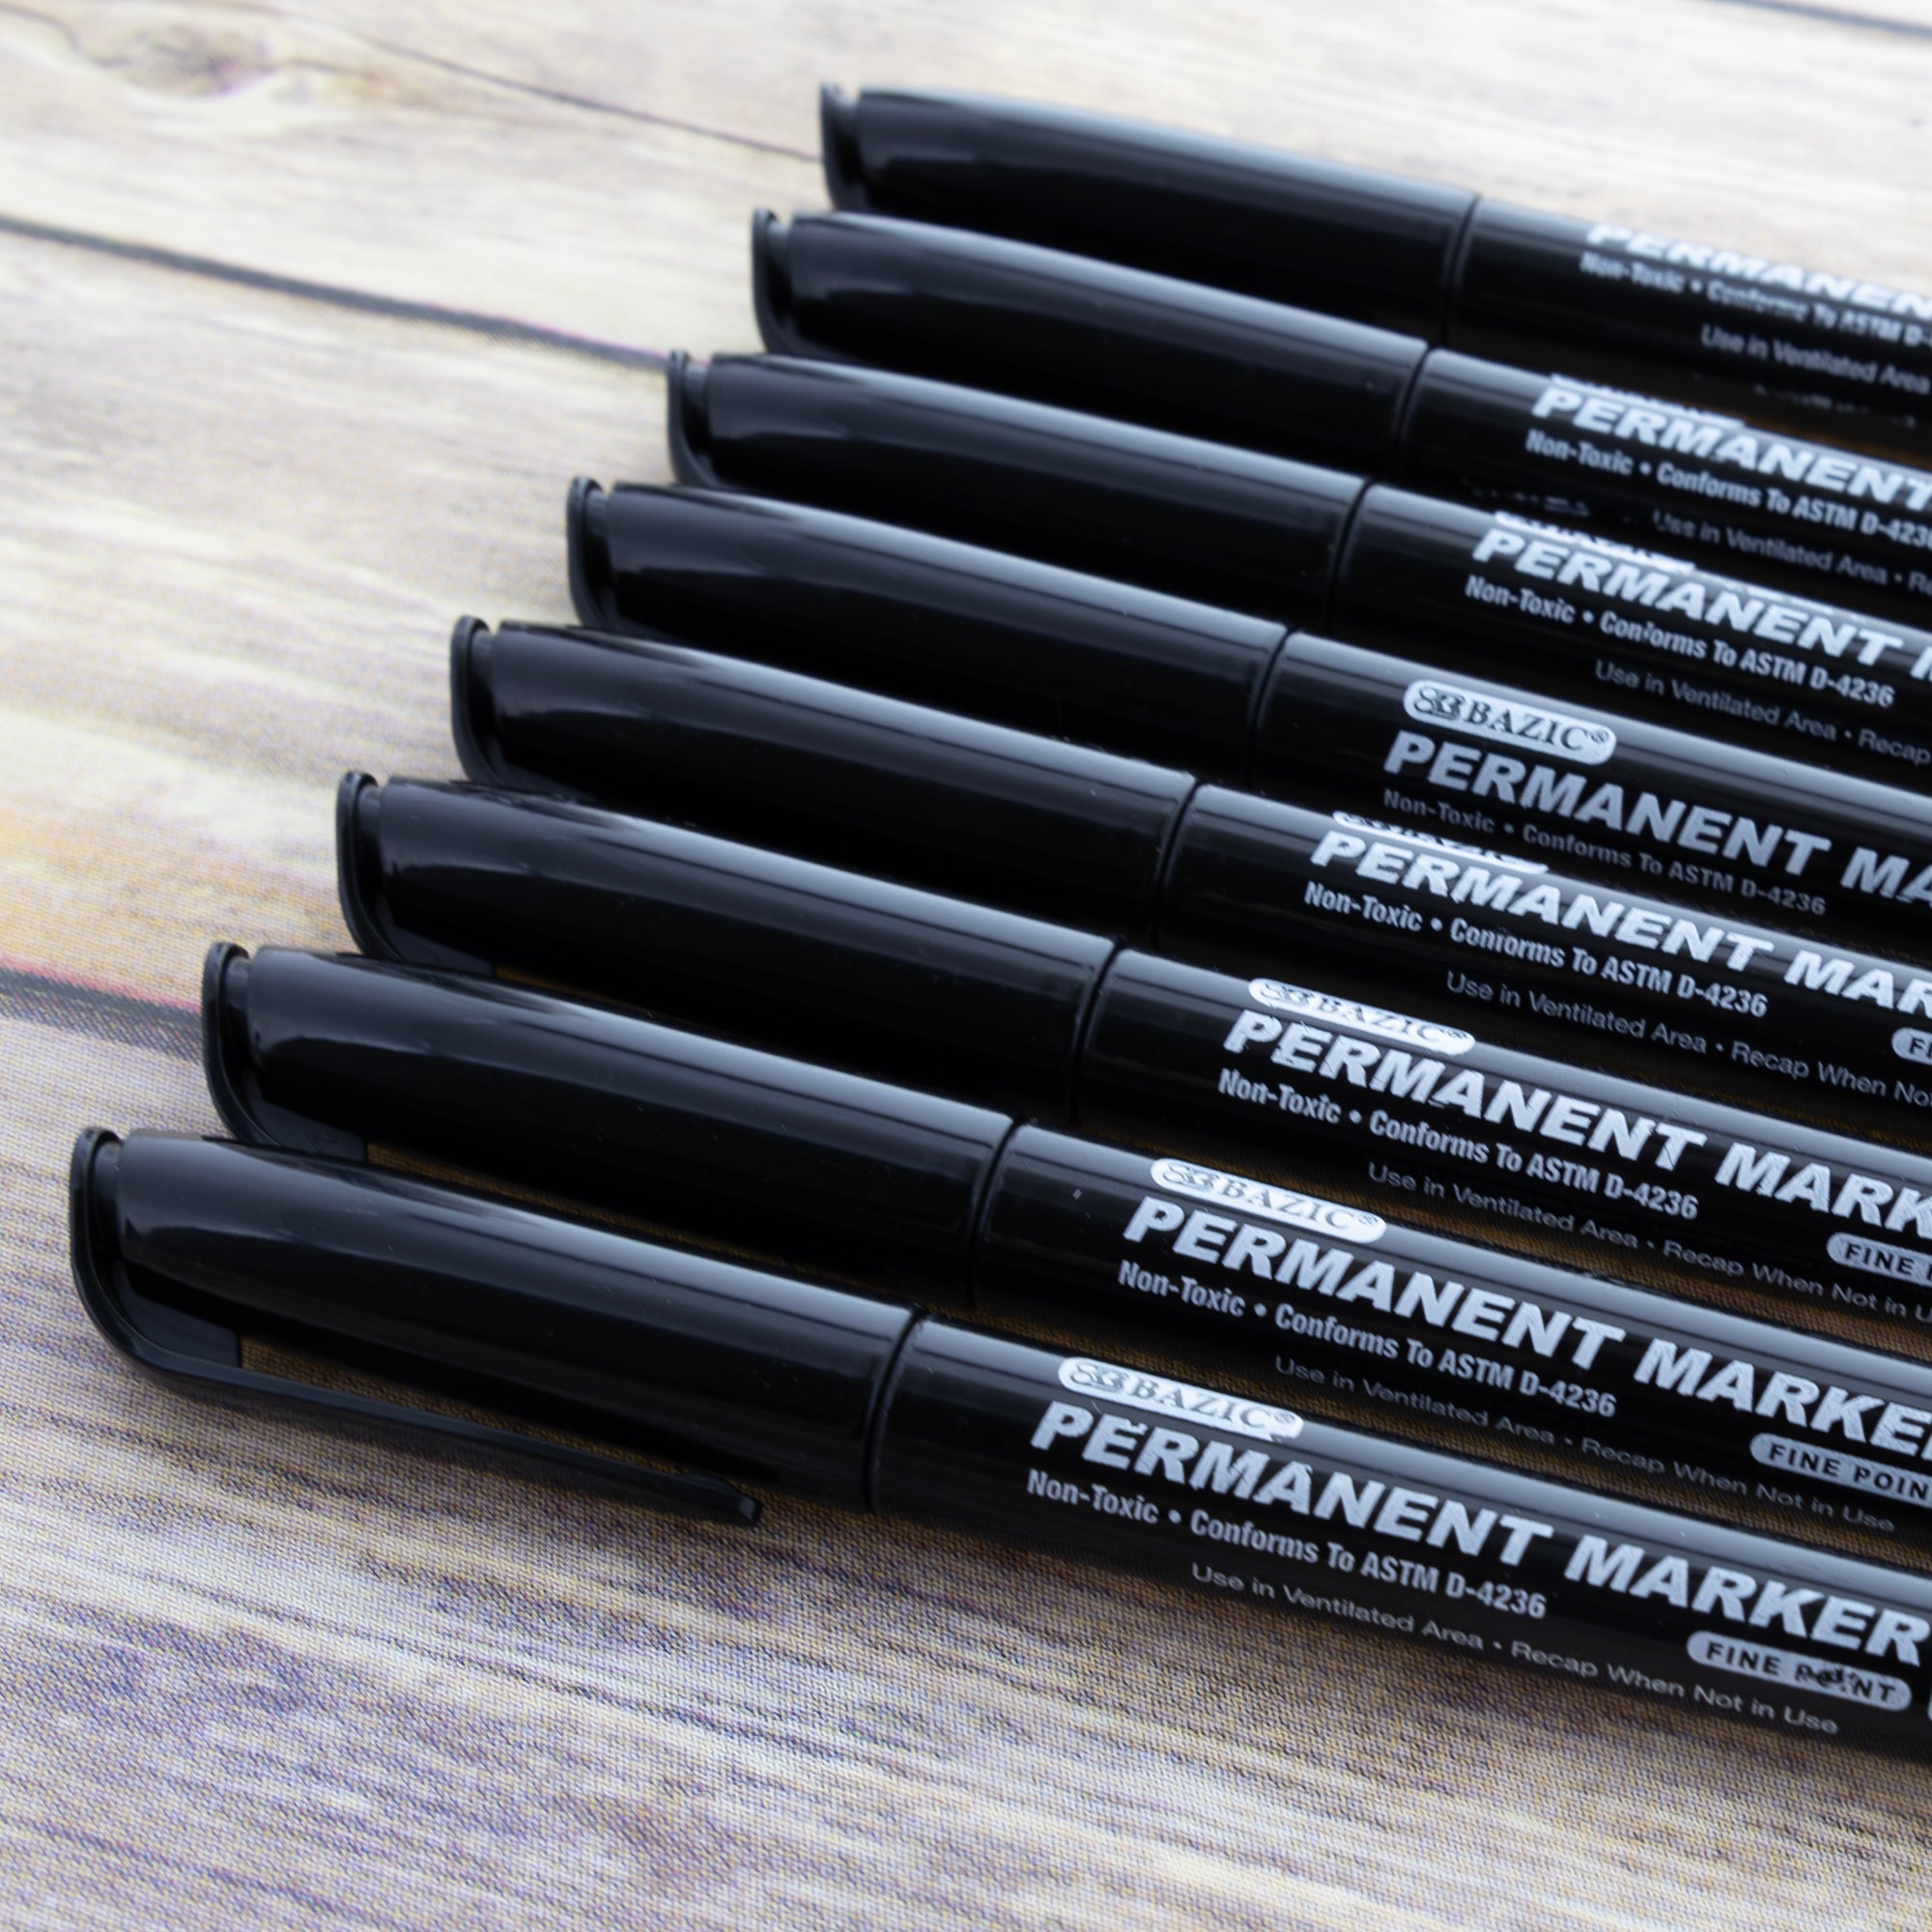 Sharpie Mixed Point Size Permanent Markers, Assorted Tips, Black, 6/Pack